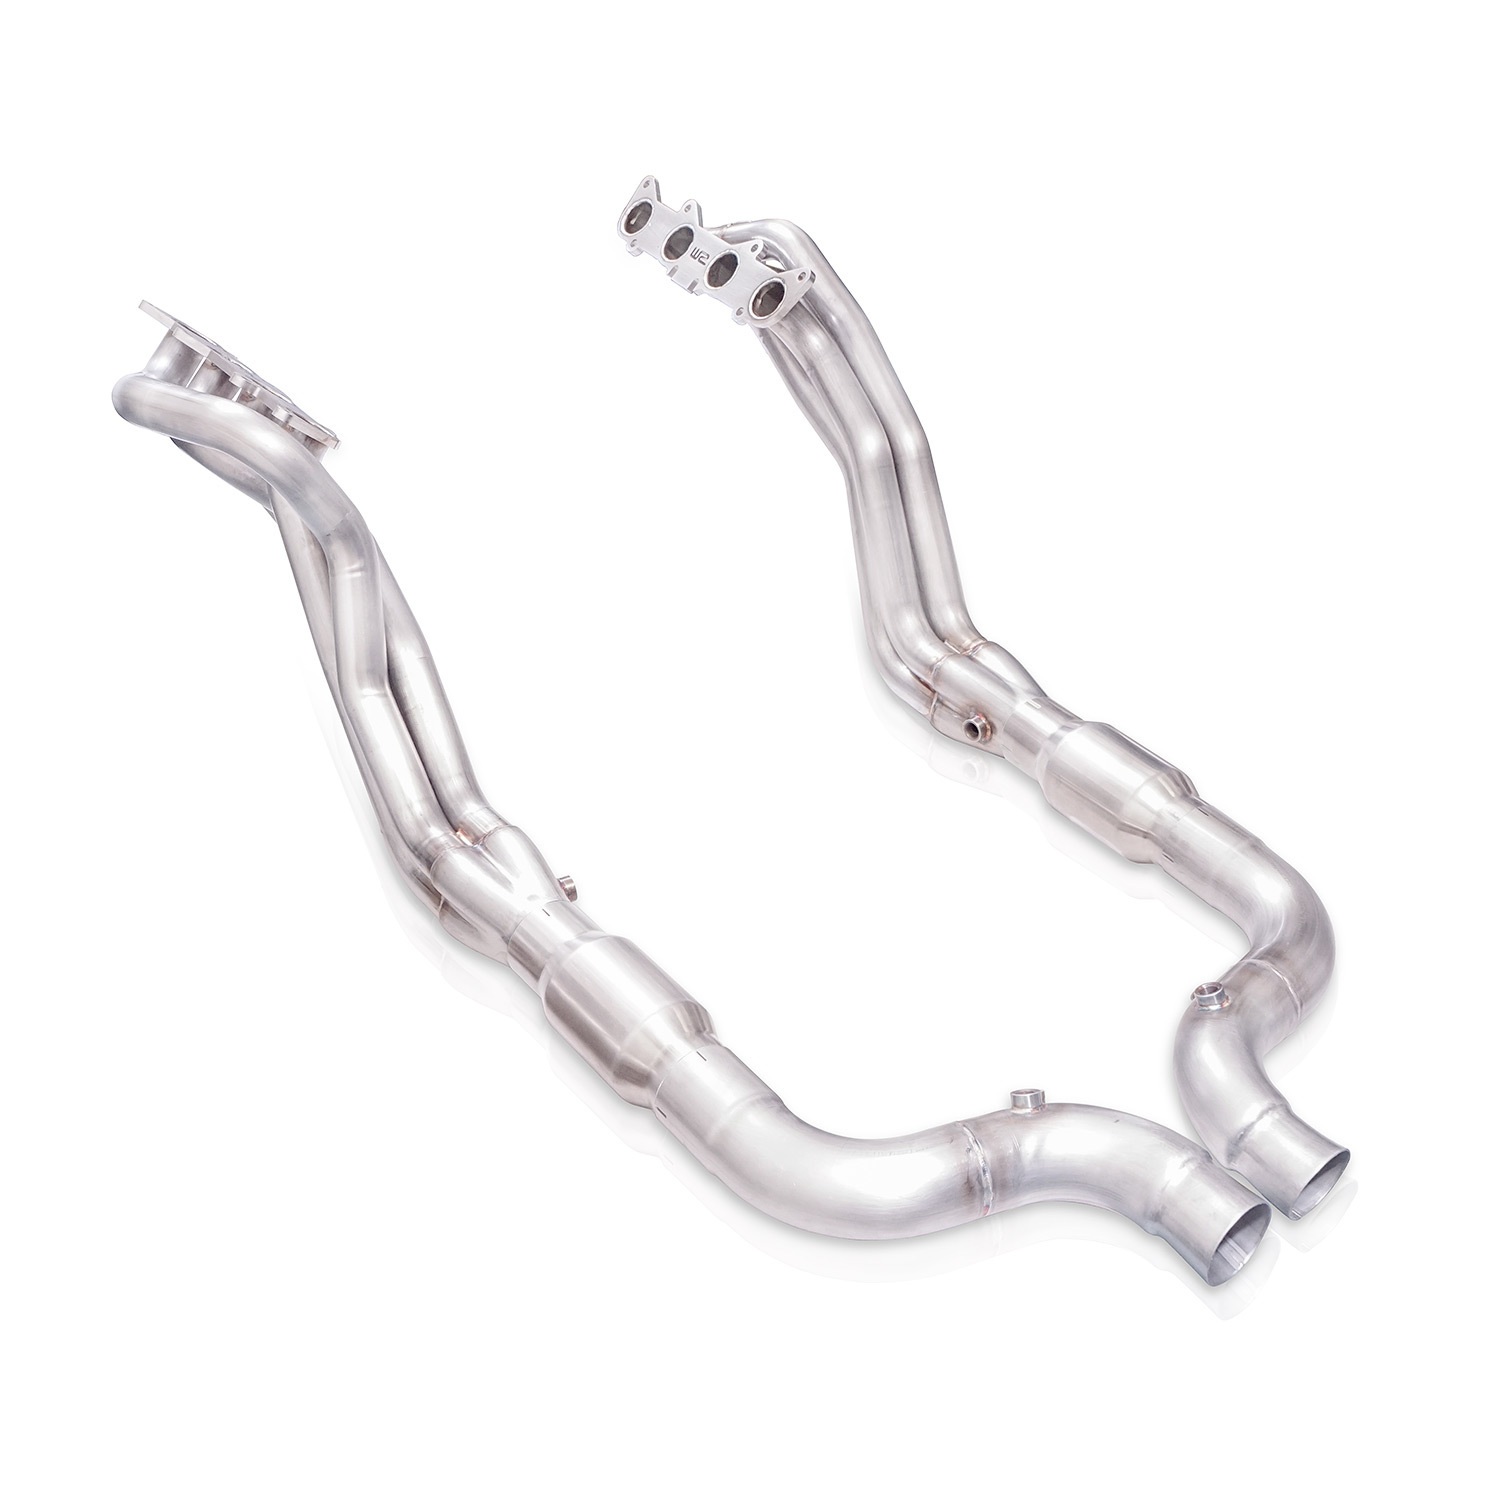 Stainless Works M15H3CAT Headers, Long Tube, 1-7/8 in Primary, 3 in Collector, Catalytic Converters Included, Stainless, Natural, Ford Coyote, Ford Mustang 2015-23, Kit